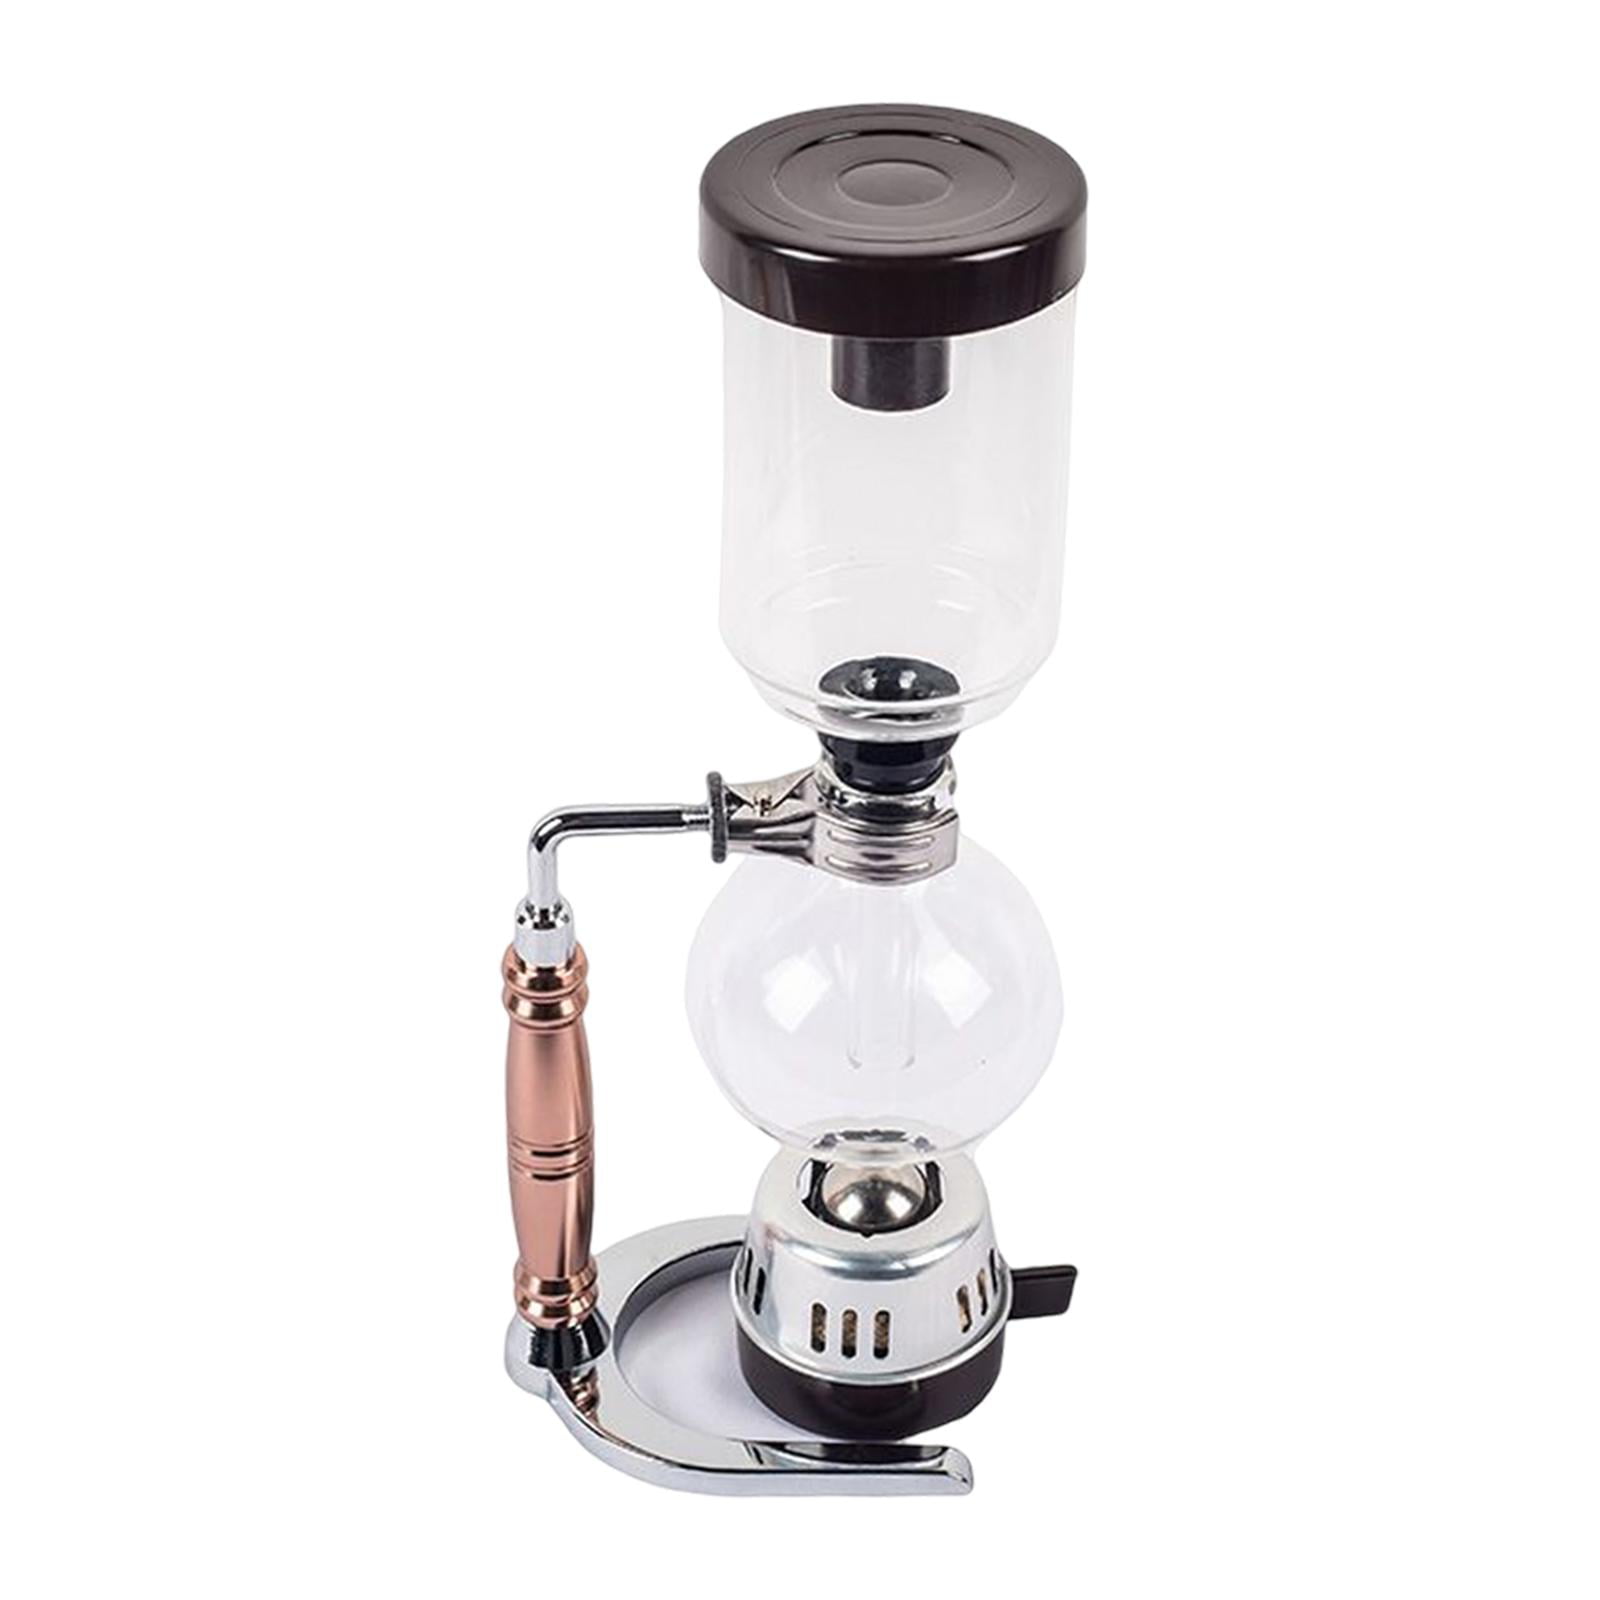 Organic Cafe Maker Kit 5-cups coffee maker Coffee Master 3/5-Cup Syphon/Vacuum Glass Coffee Maker 